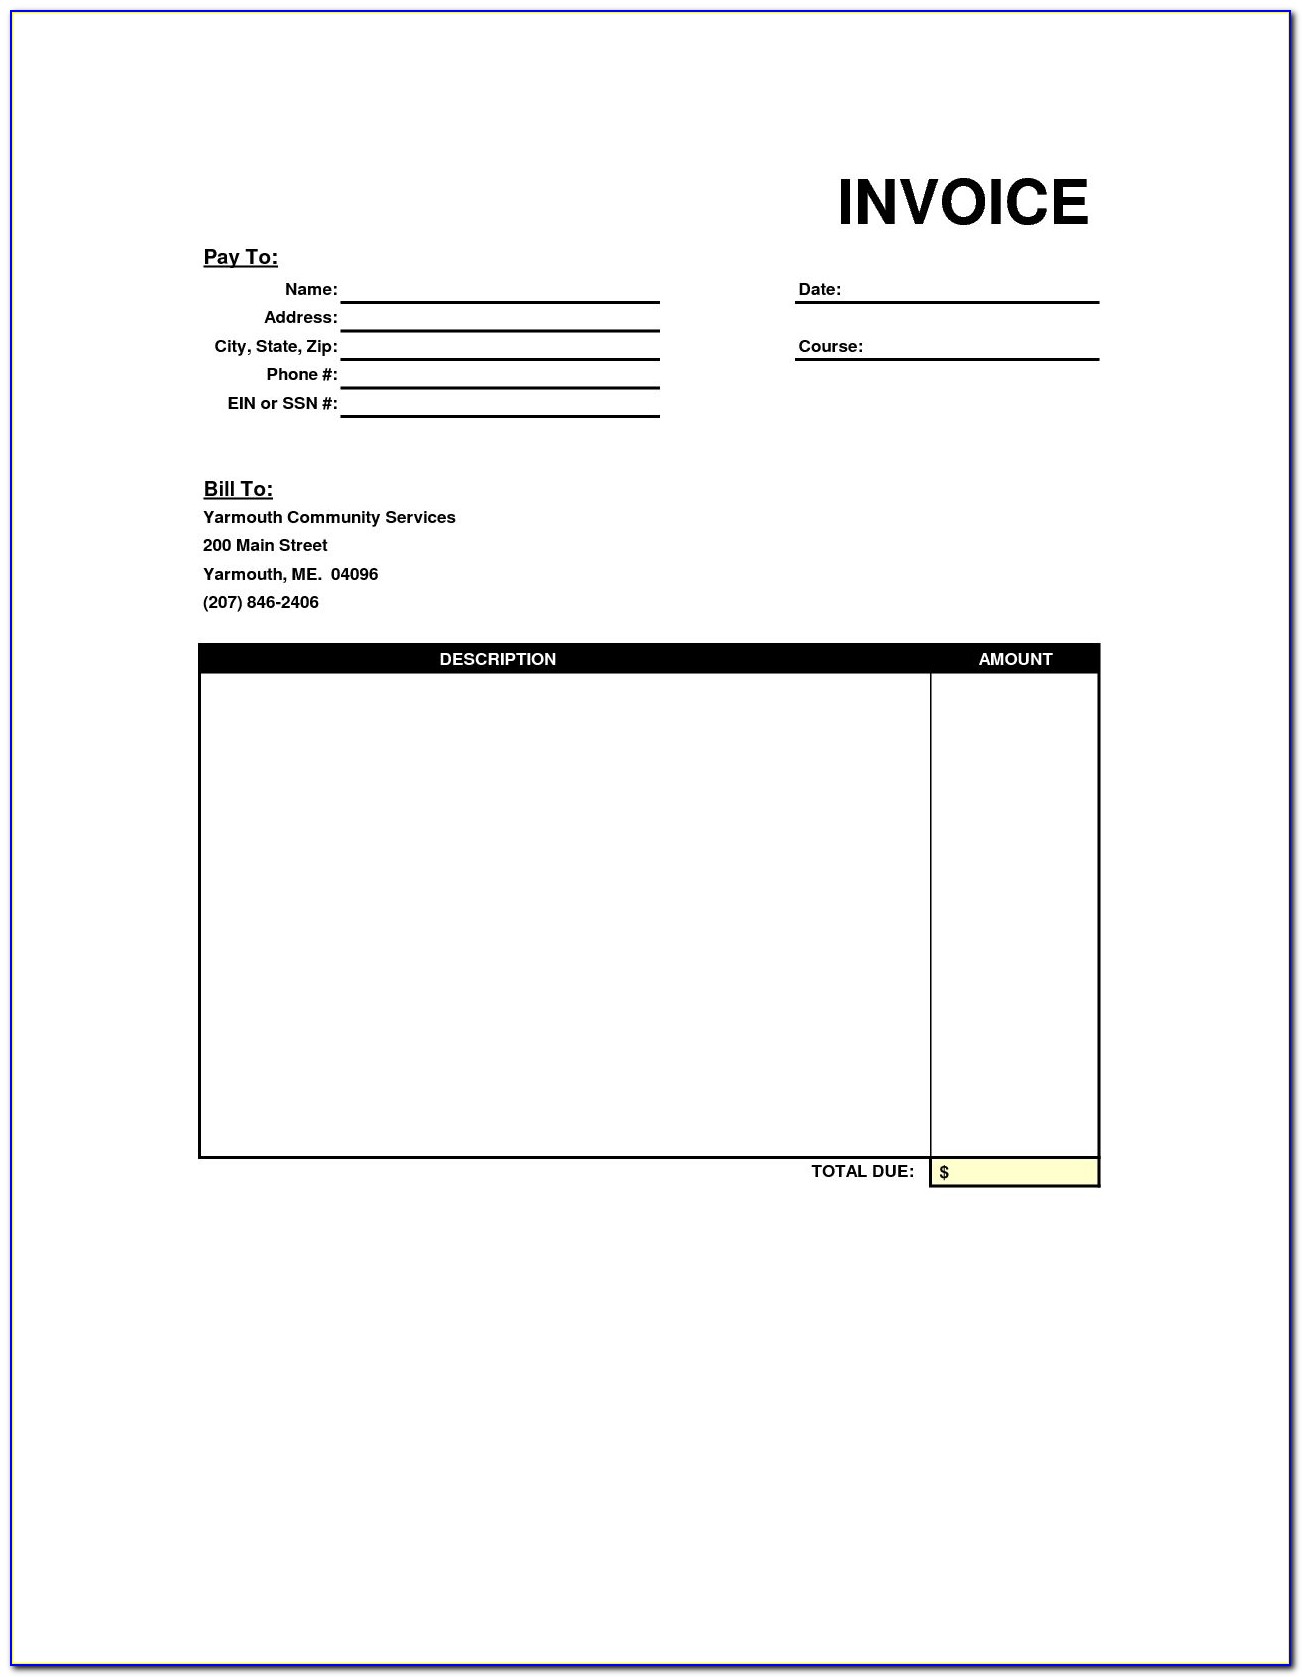 Sample Invoice For Painting Job